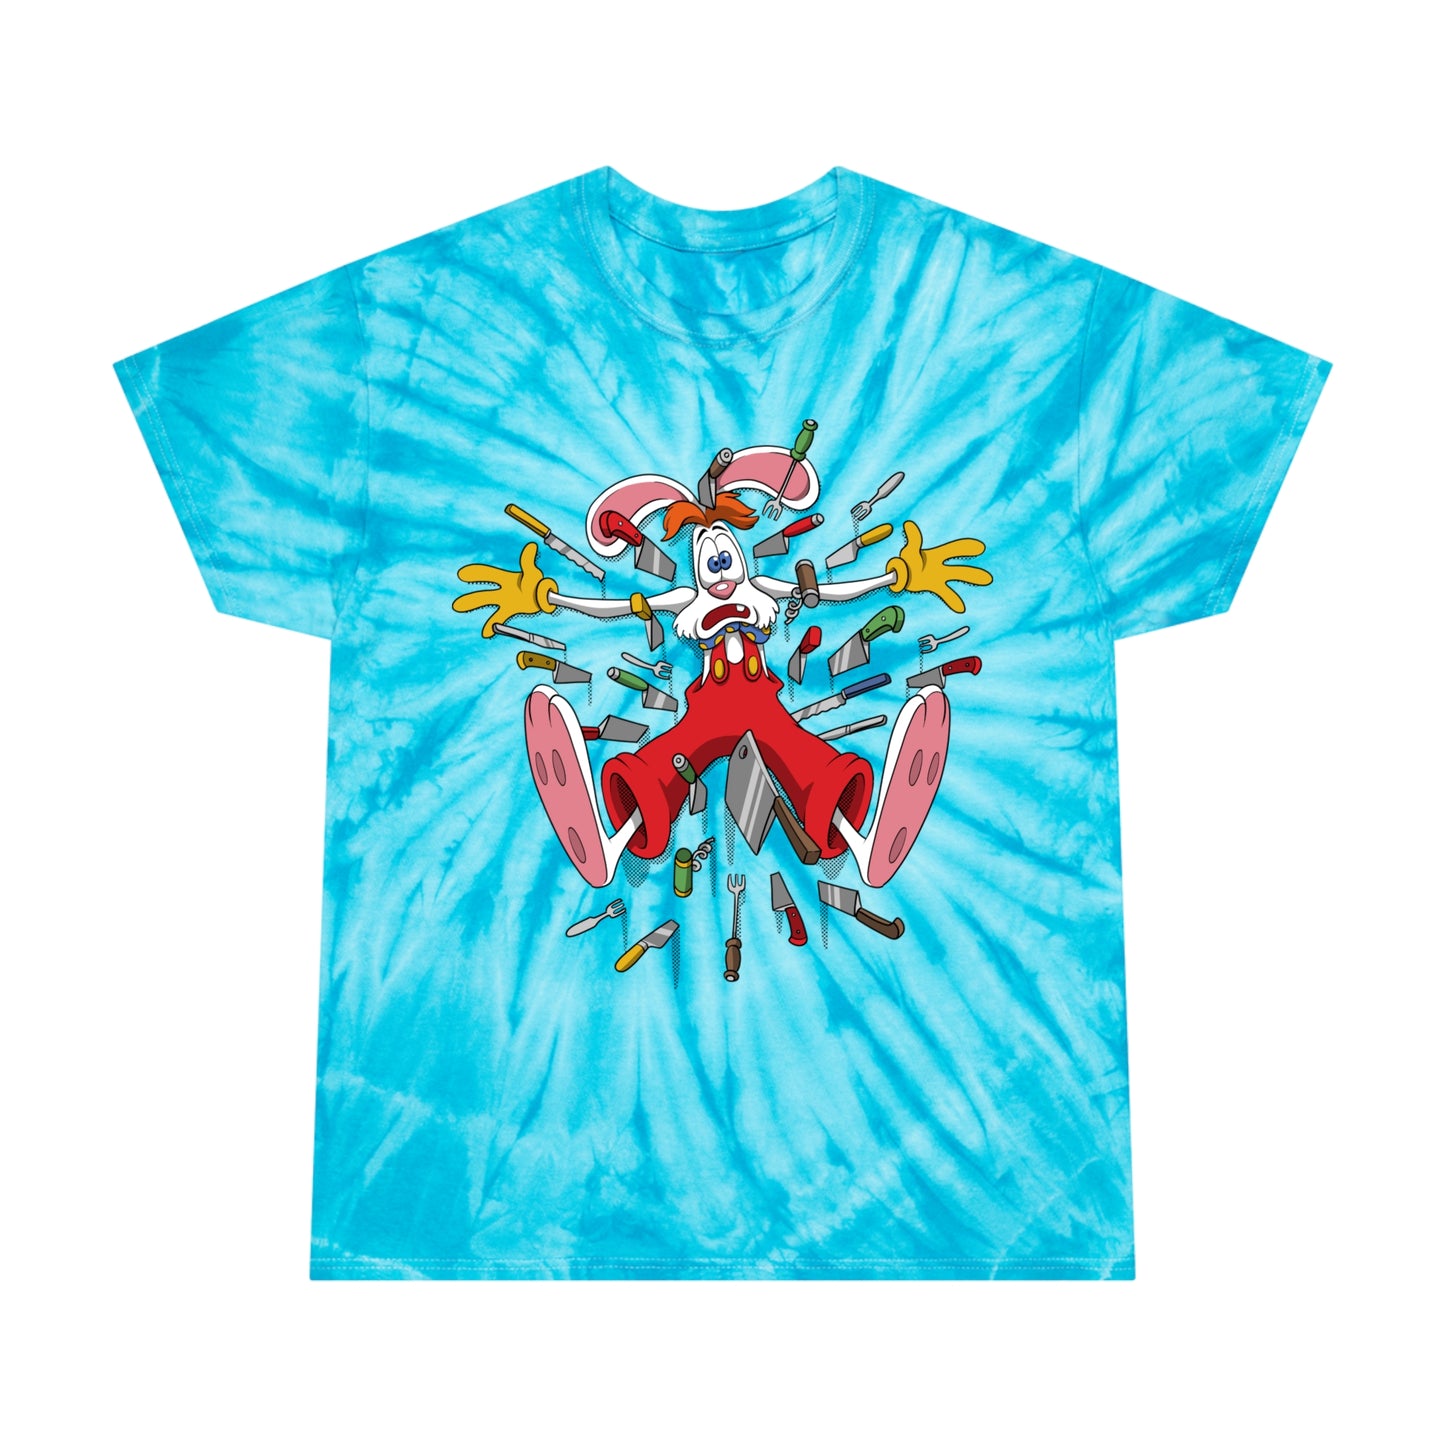 Knives Out, Roger tie-dye t-shirt